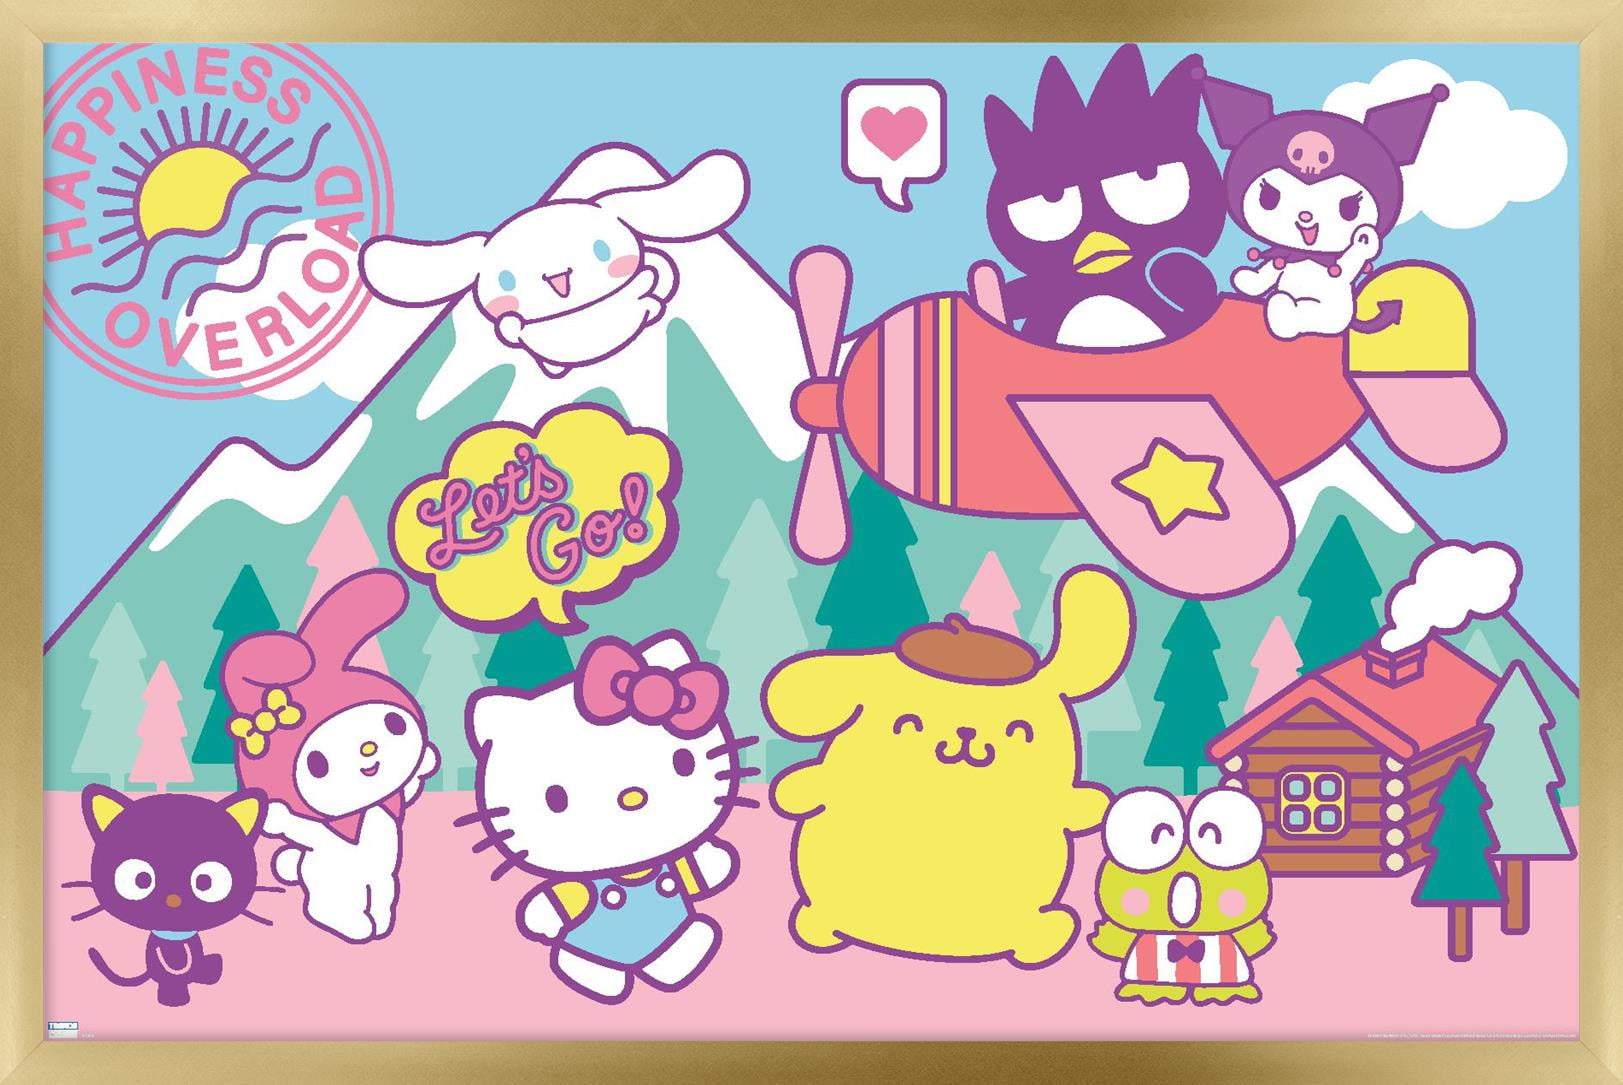 Hello Kitty and Friends - Happiness Overload Wall Poster, 22.375 x 34 